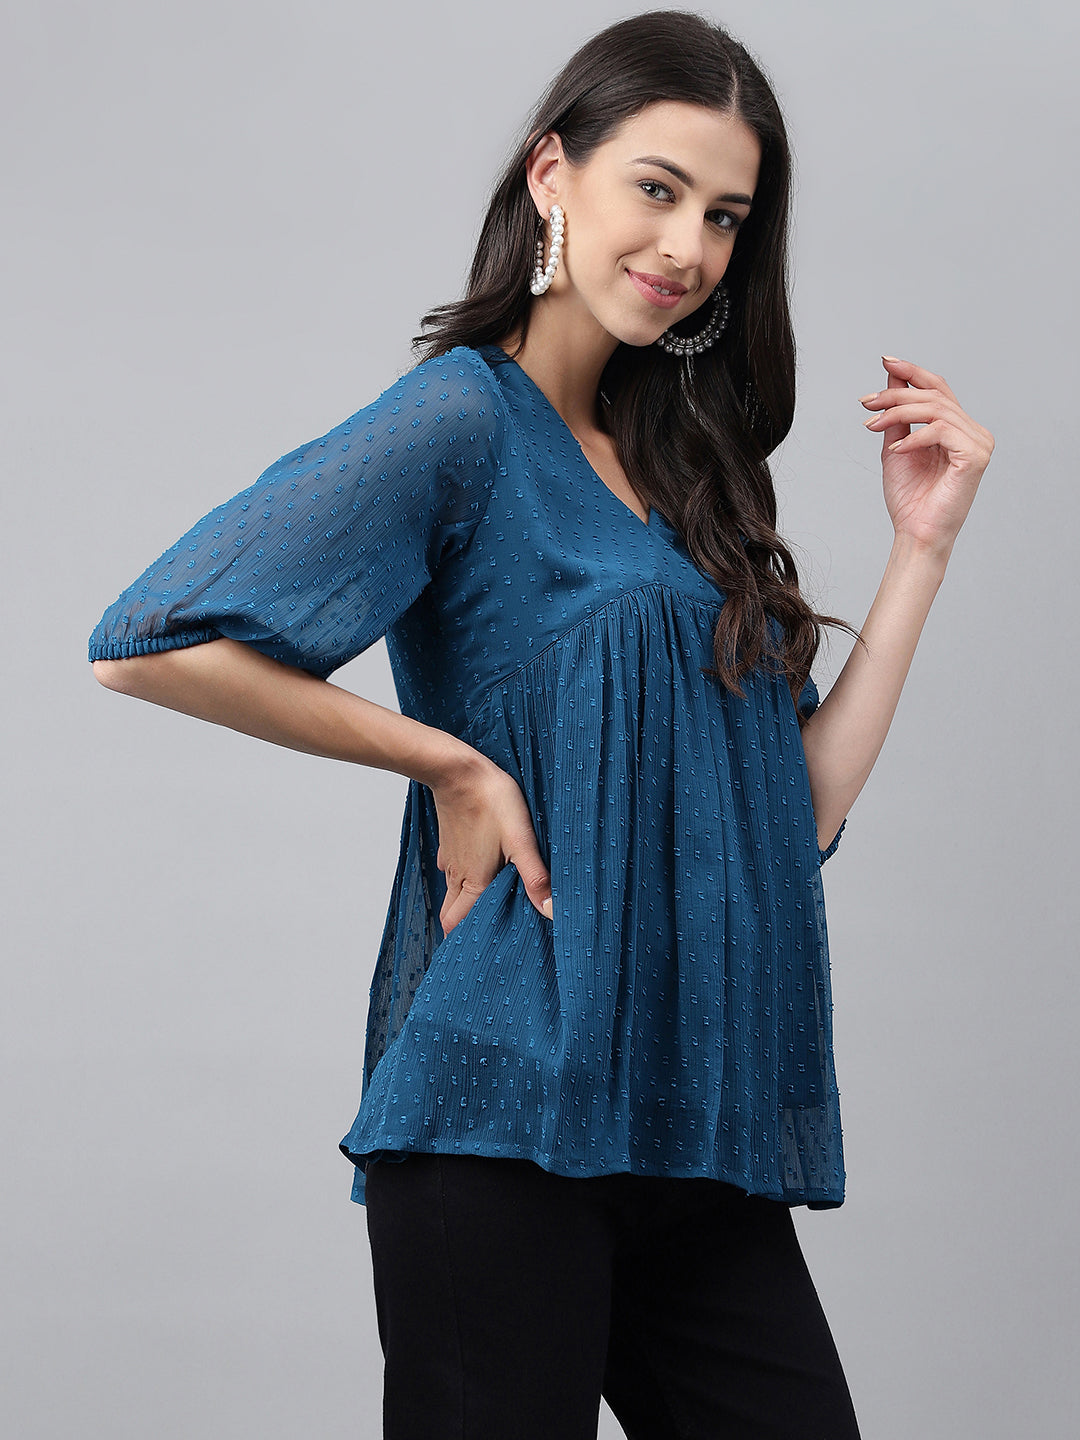 Women Teal Blue Dobby Chiffon Solid Empire Top